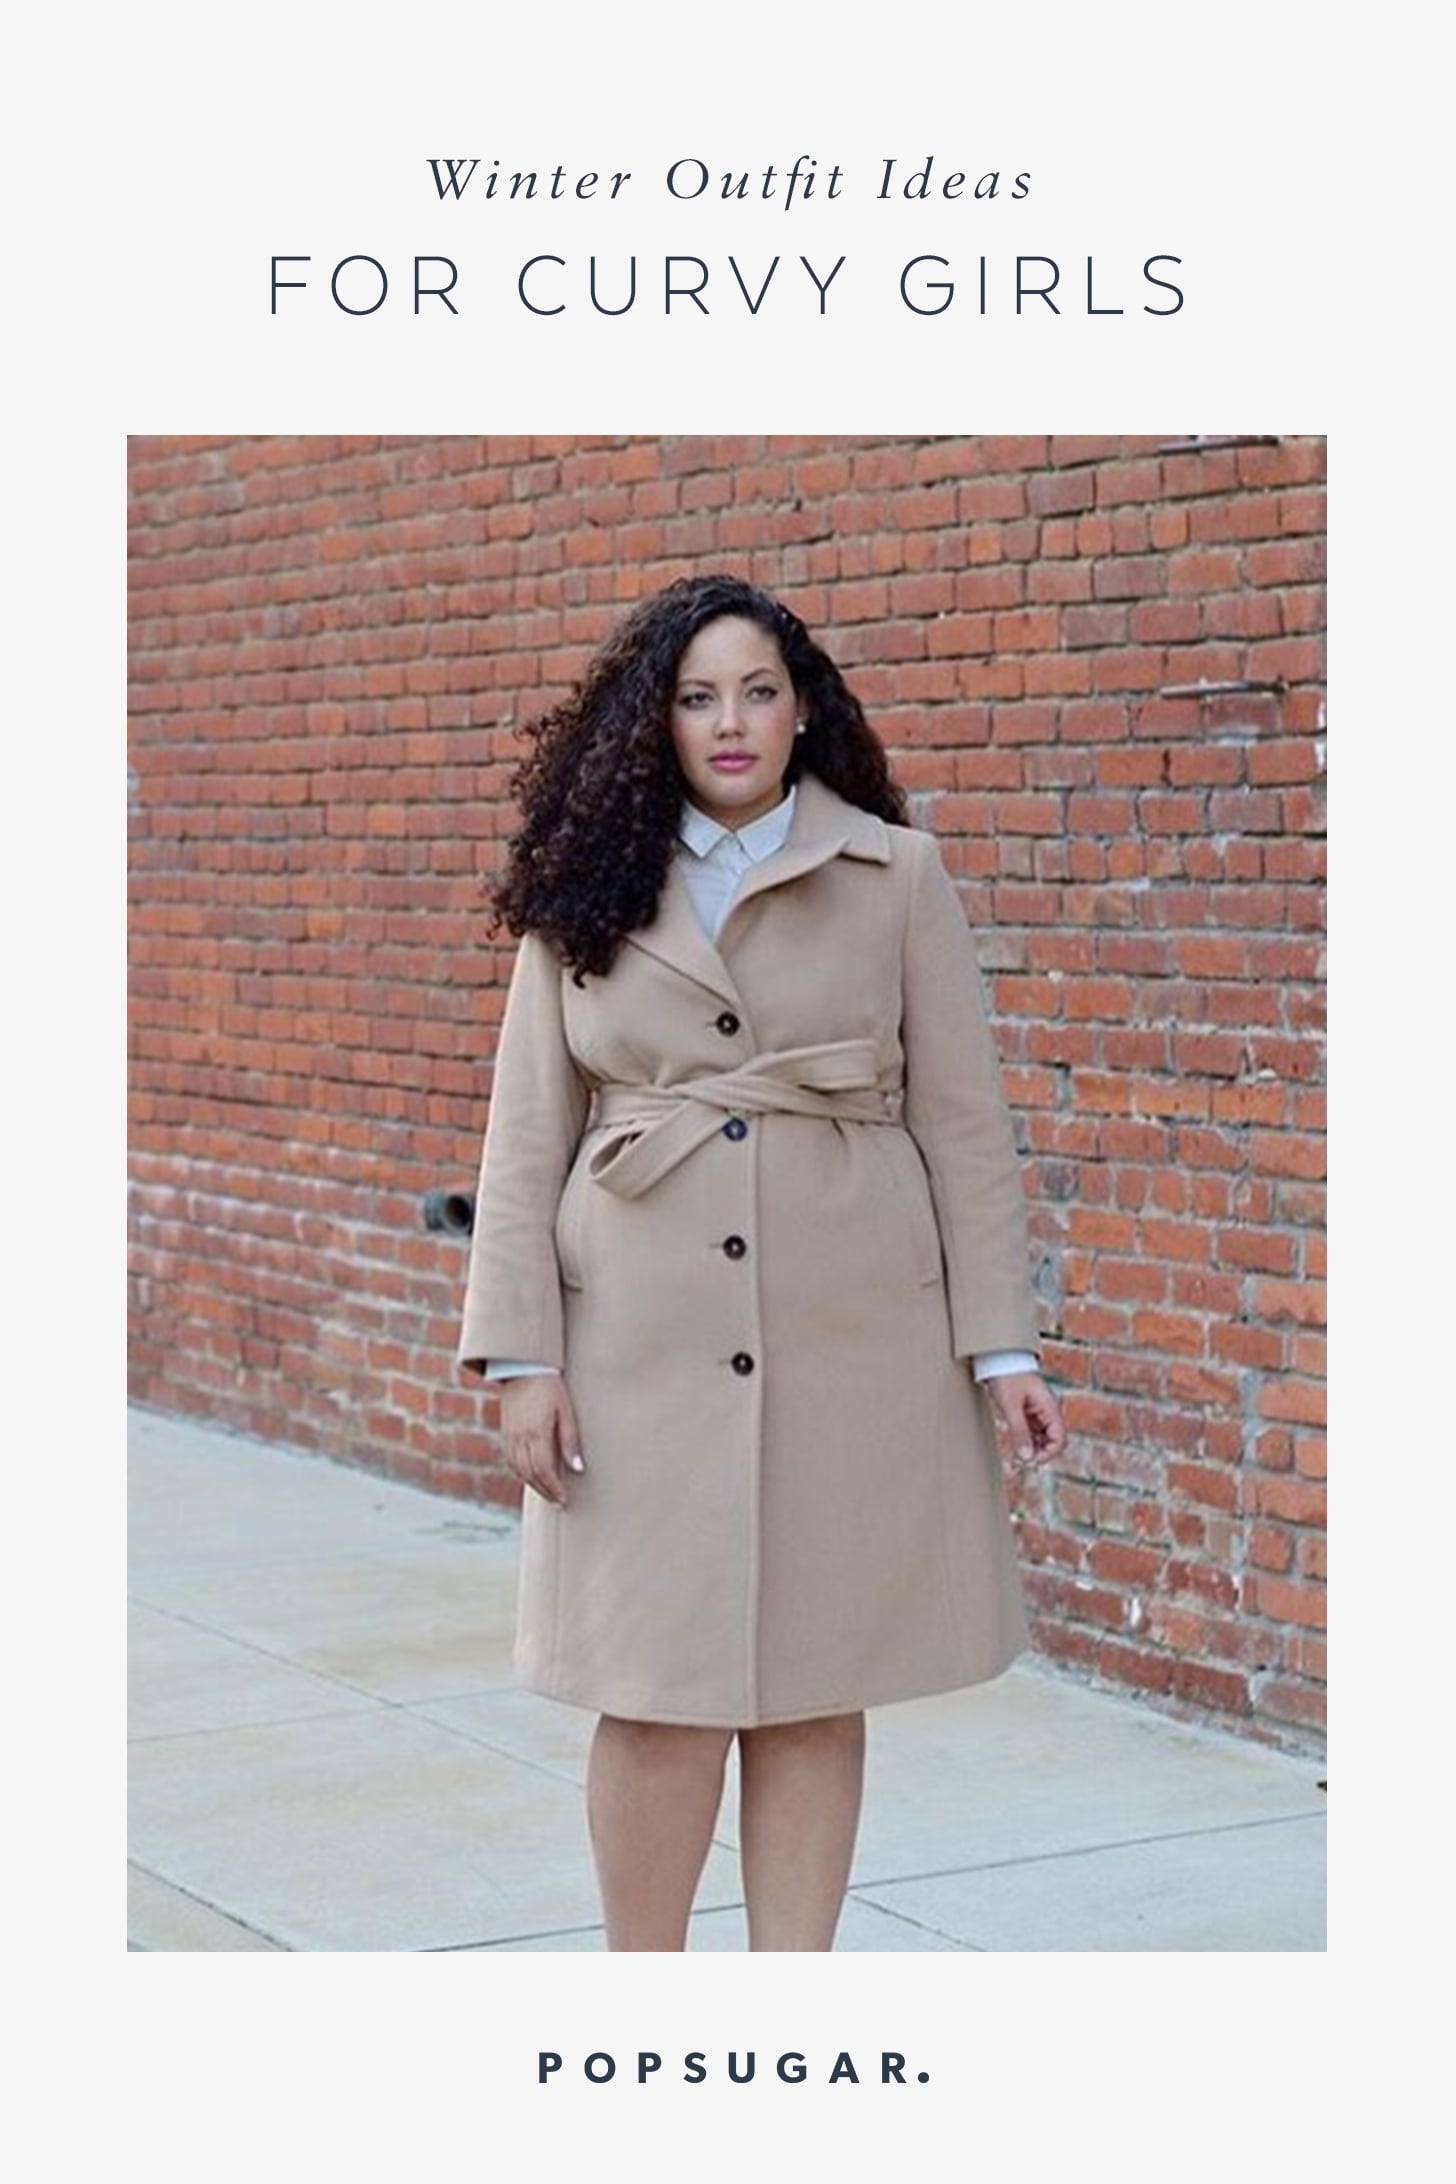 Stylish and Warm: Plus-Size Winter Outfits for Cold Weather - Trendy Curvy